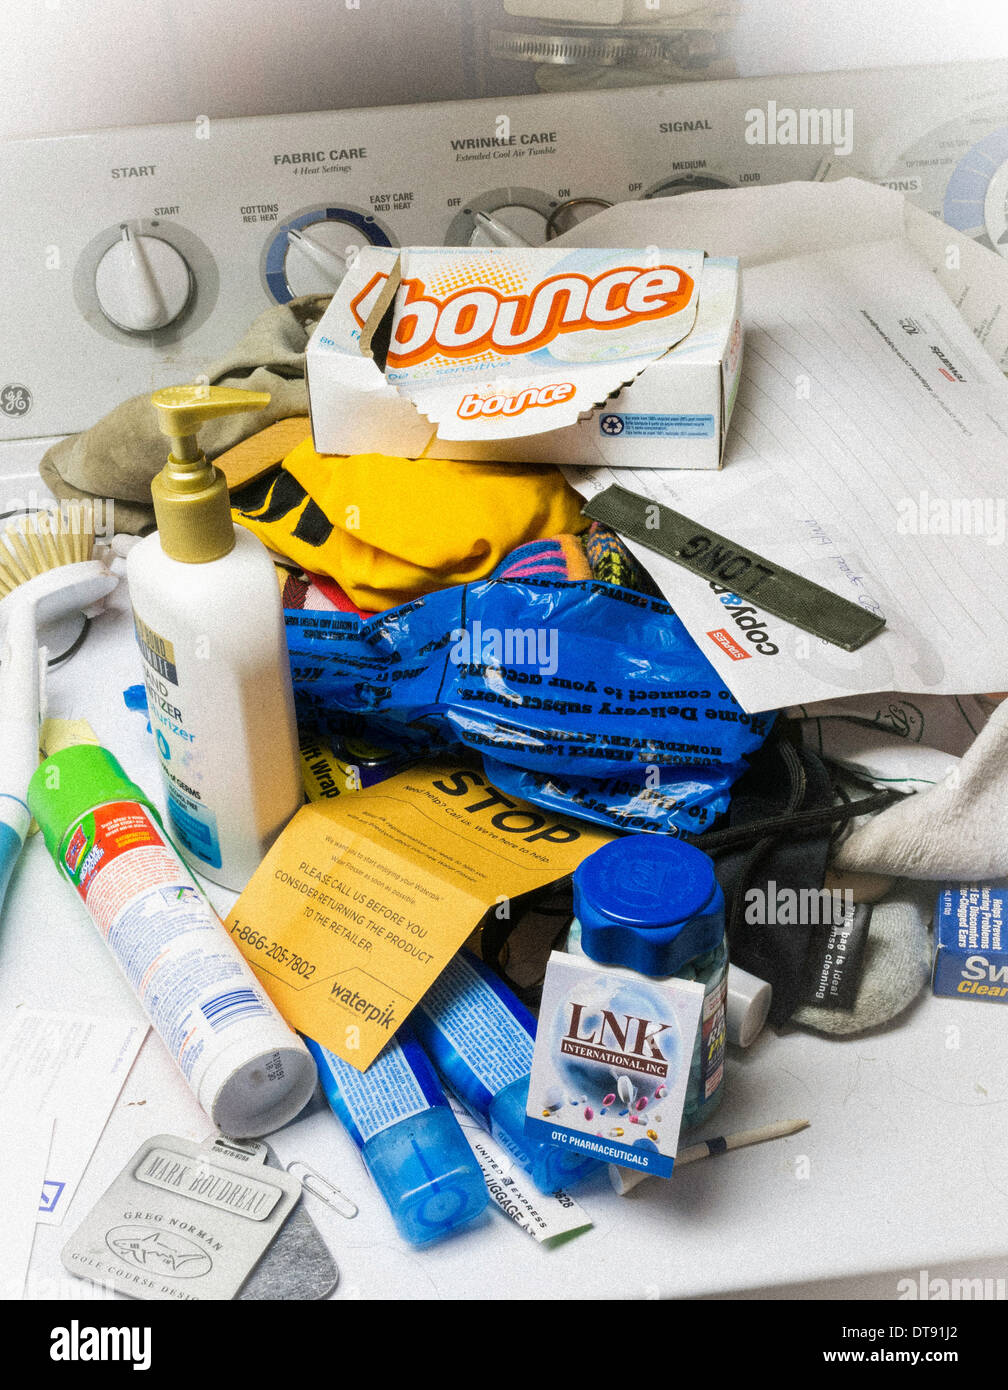 Household Items Clutter on Residential Washing Machine, USA Stock Photo